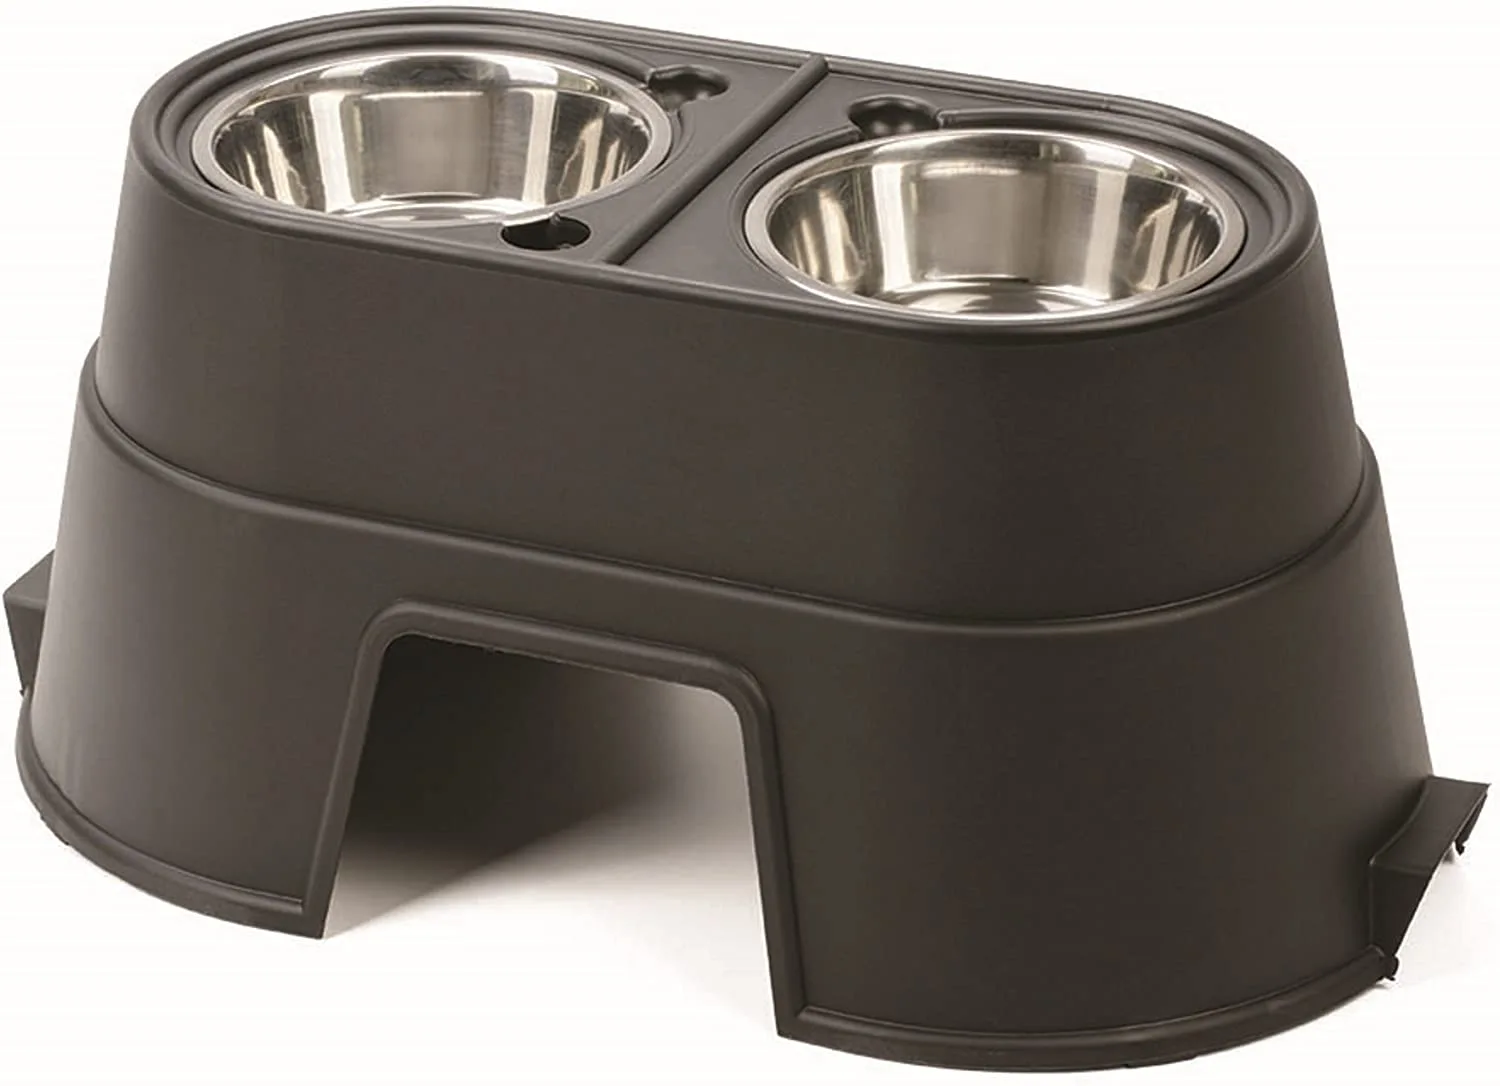 Best material for dog bowls